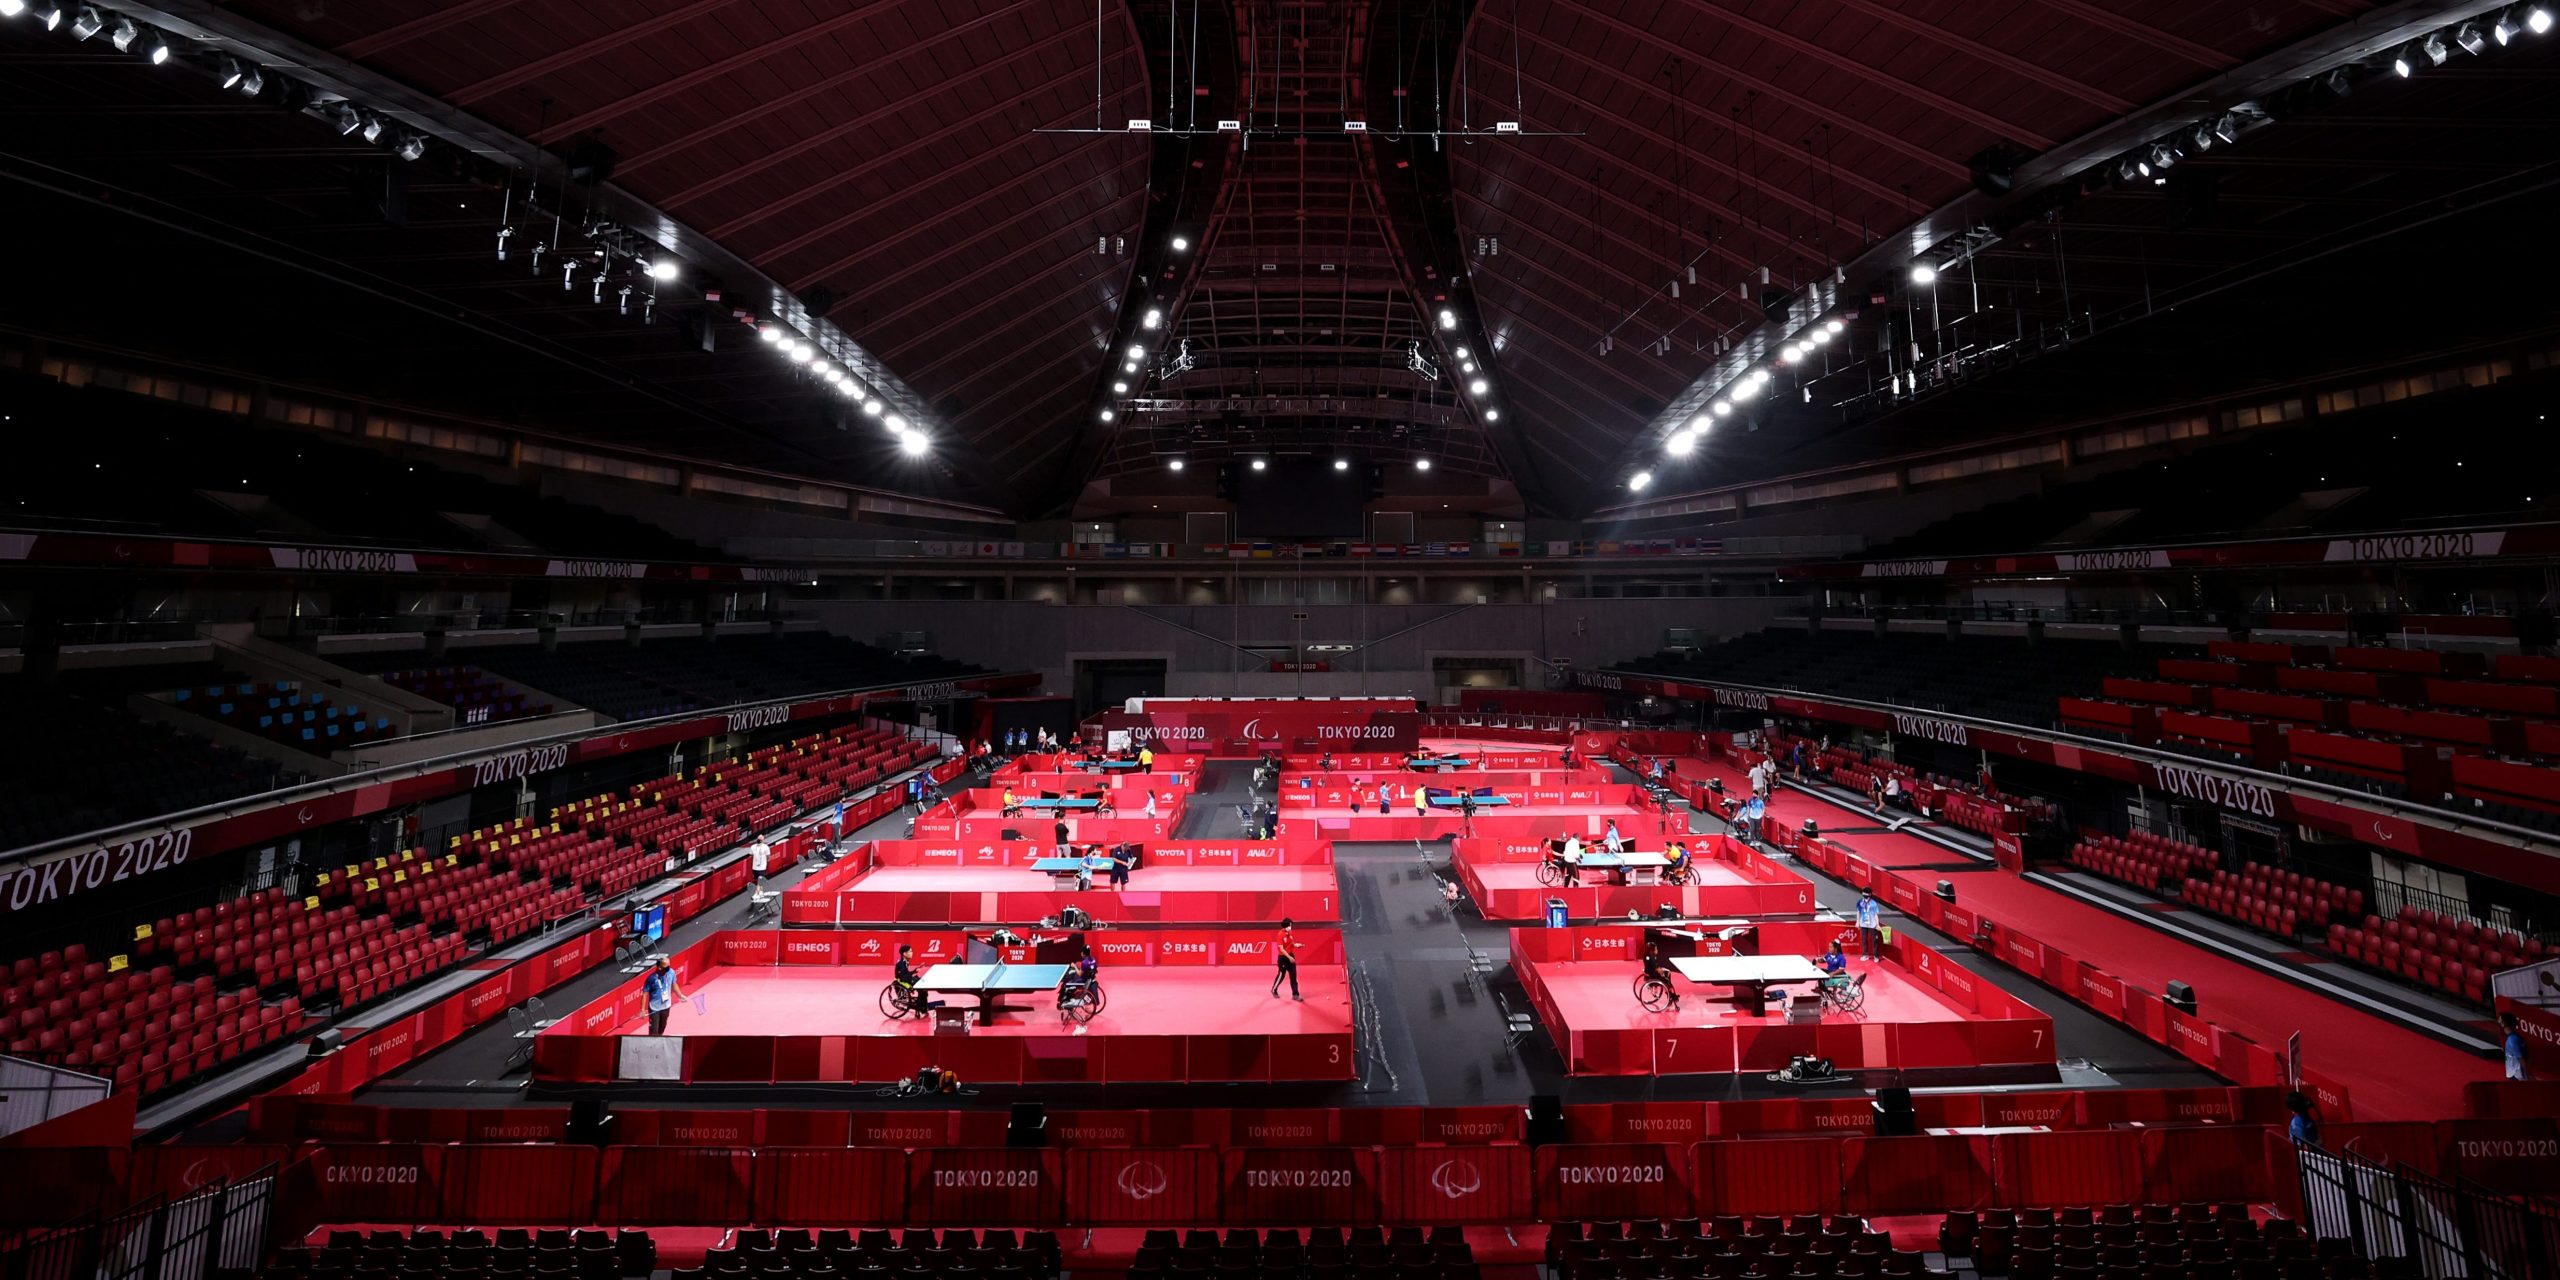 A general view during a table tennis practice session ahead of the Tokyo 2020 Paralympic Games at 775695002 on August 21, 2021 in Tokyo, Japan.